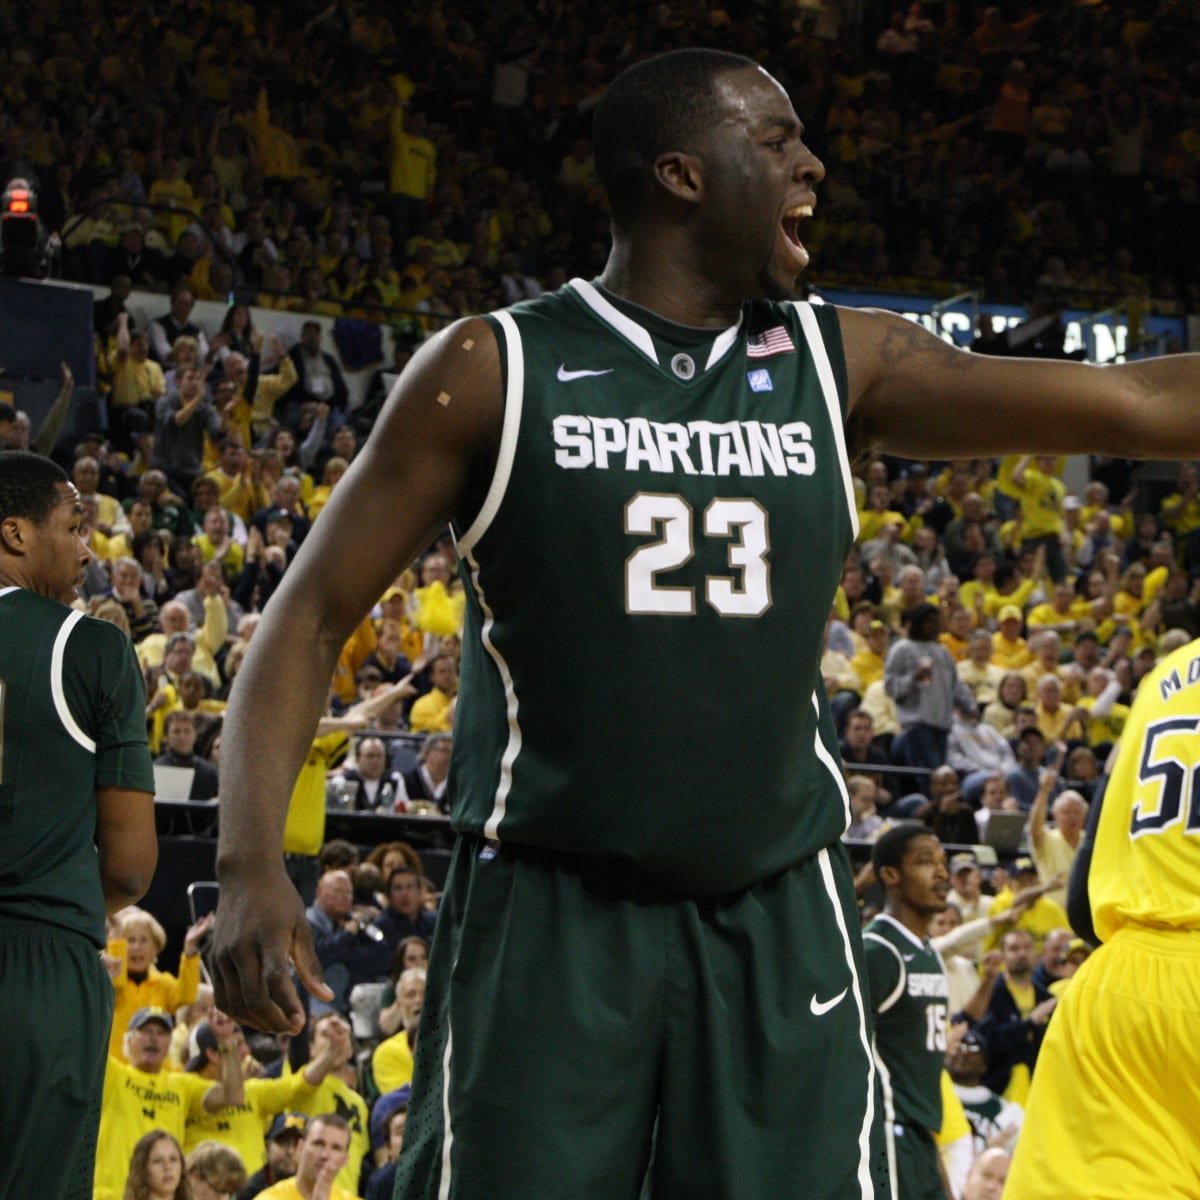 Special player': Draymond Green's No. 23 to be retired by Michigan